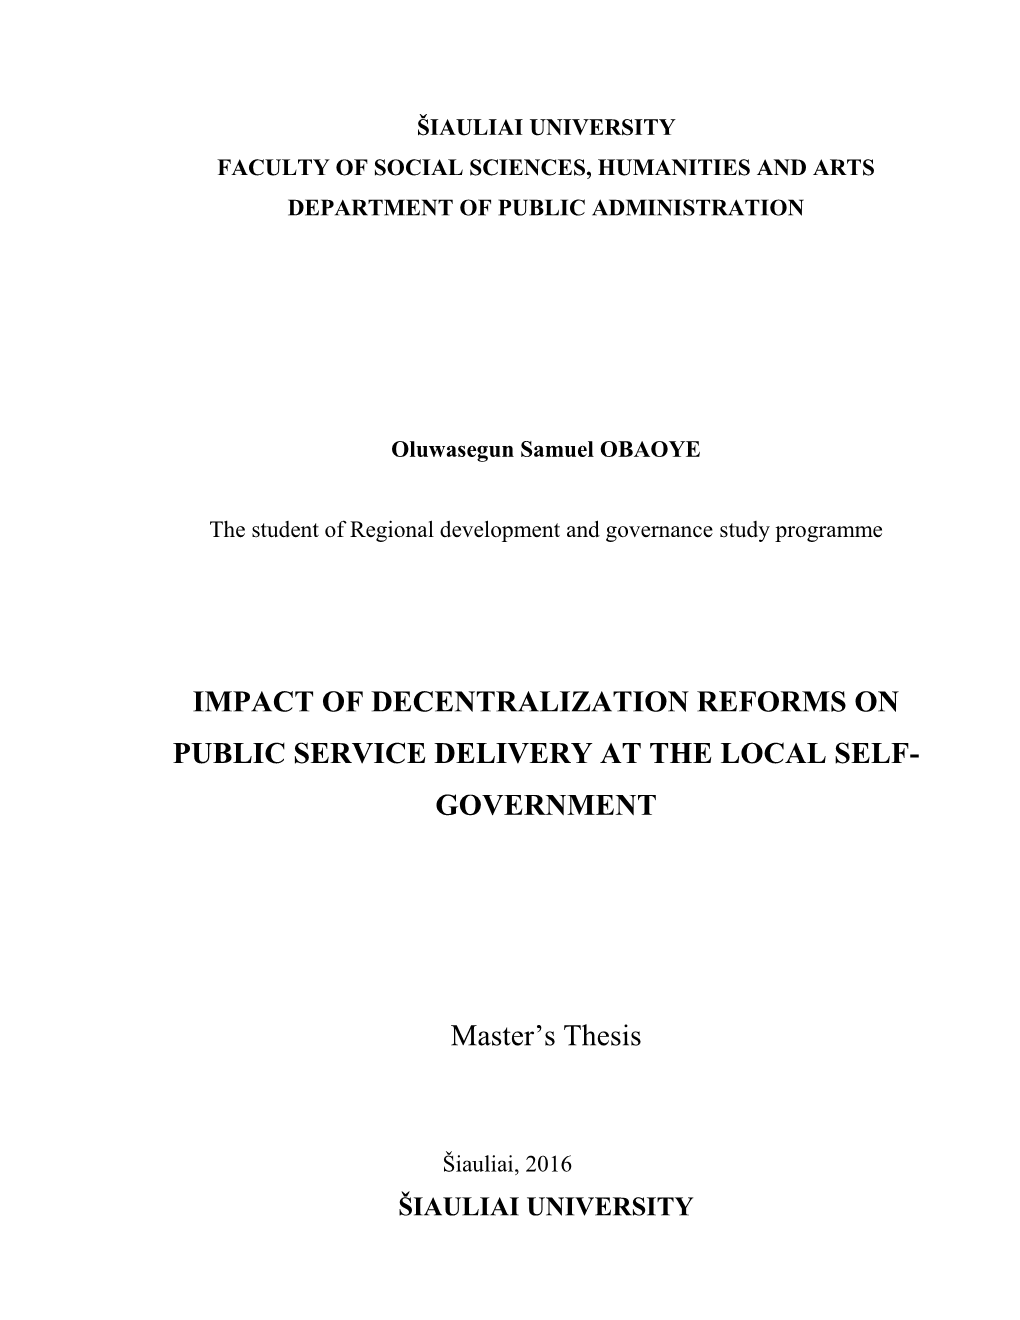 IMPACT of DECENTRALIZATION REFORMS on PUBLIC SERVICE DELIVERY at the LOCAL SELF- GOVERNMENT Master's Thesis